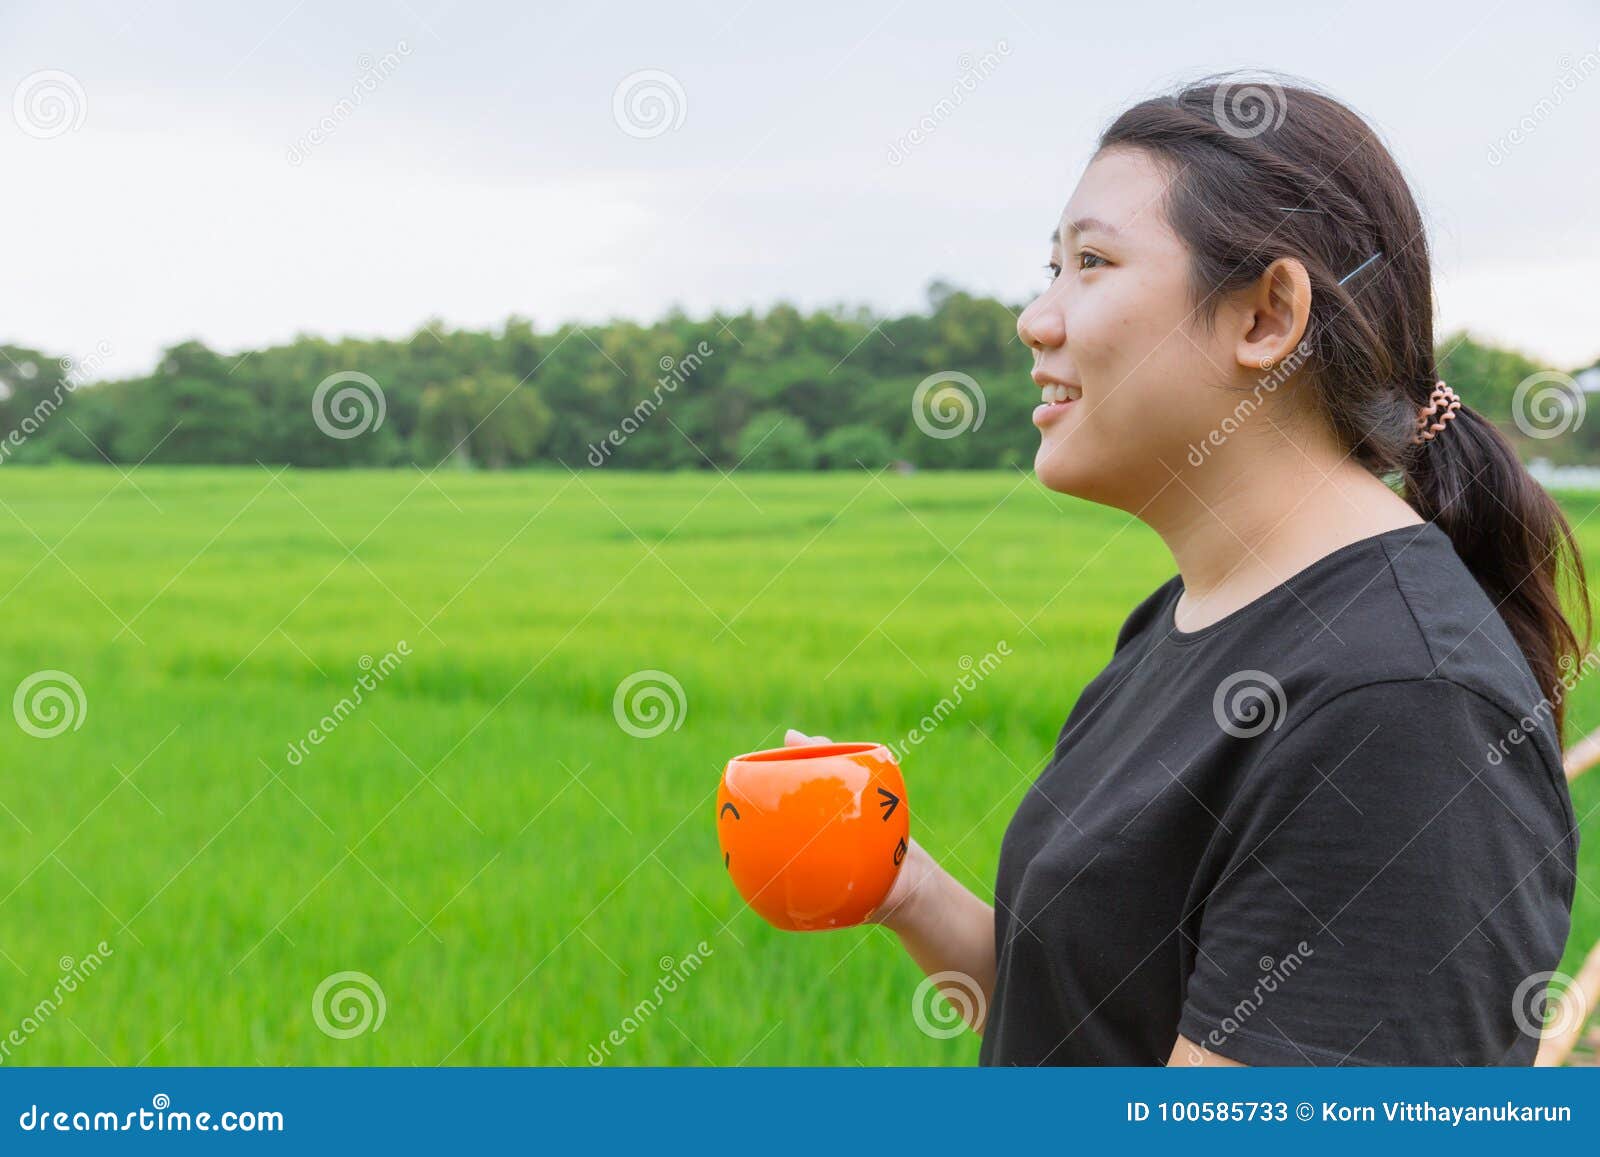 Asian Teen Fat Women Side View Hold Mug With Green Nature Stock Image